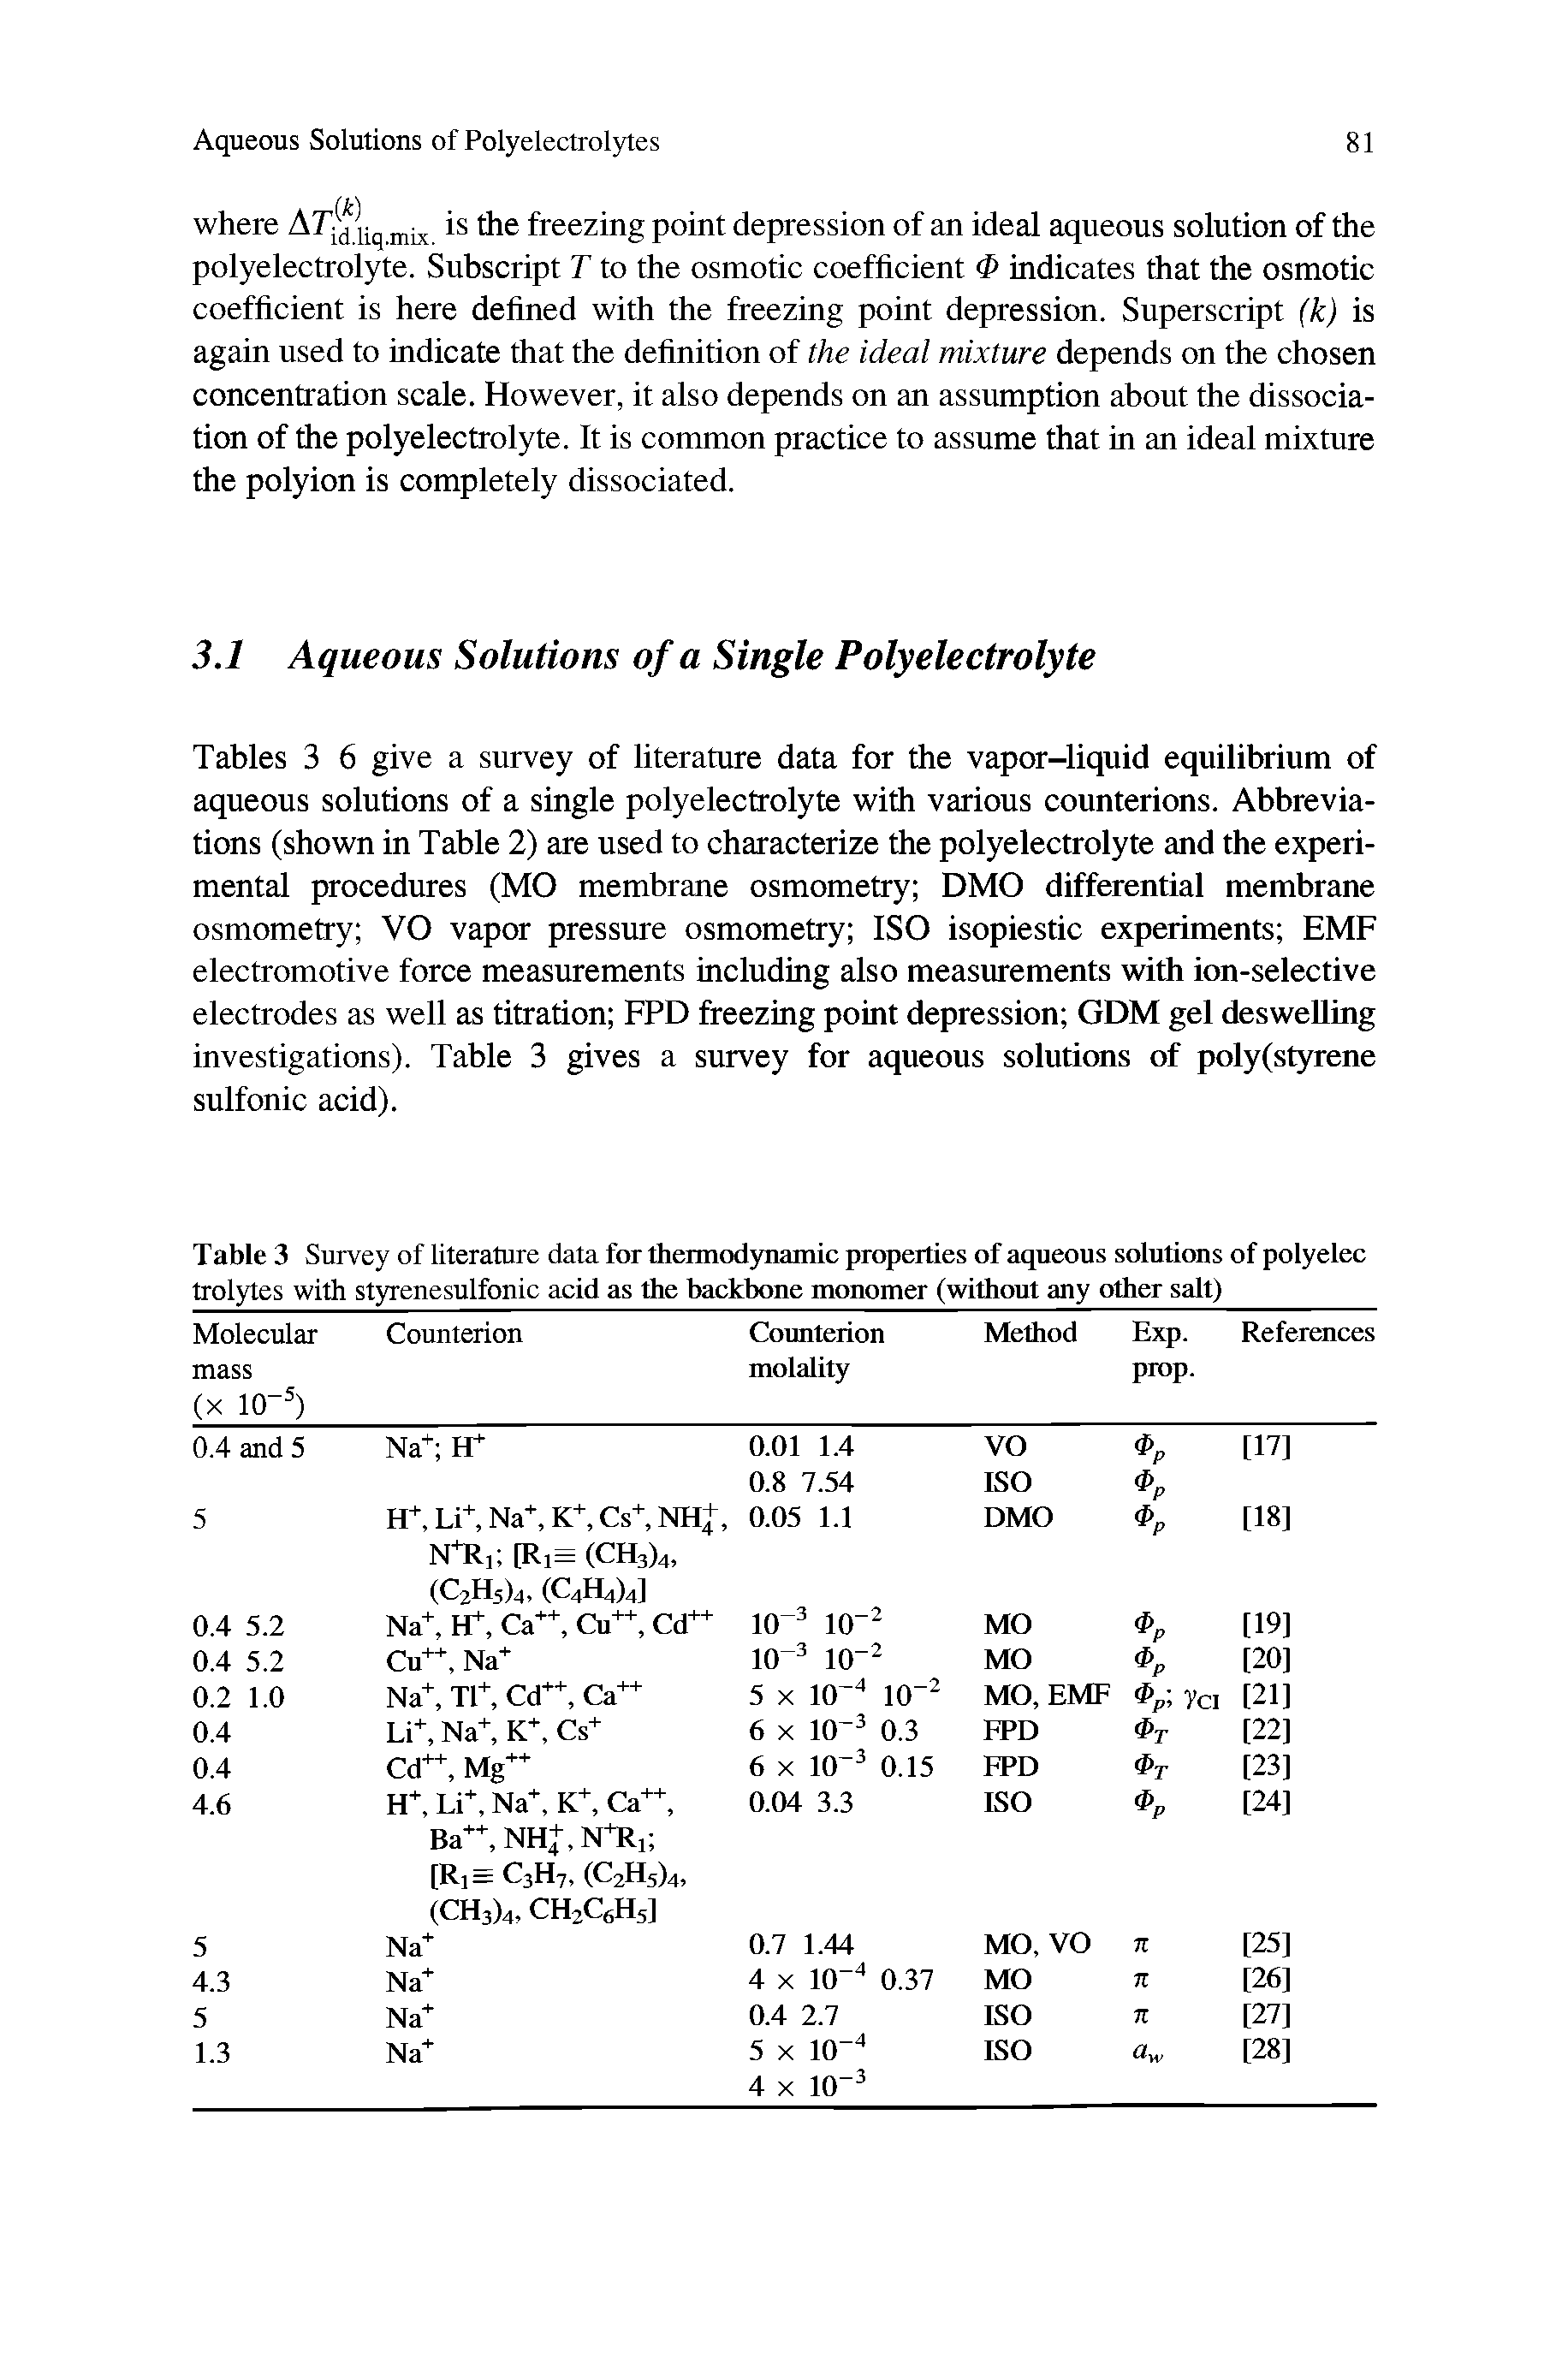 Tables 3 6 give a survey of literature data for the vapor-liquid equilibrium of aqueous solutions of a single polyelectrolyte with various counterions. Abbreviations (shown in Table 2) are used to characterize the polyelectrolyte and the experimental procedures (MO membrane osmometry DMO differential membrane osmometry VO vapor pressure osmometry ISO isopiestic experiments EMF electromotive force measurements including also measurements with ion-selective electrodes as well as titration FPD freezing point depression GDM gel deswelling investigations). Table 3 gives a survey for aqueous solutions of poly(styrene sulfonic acid).